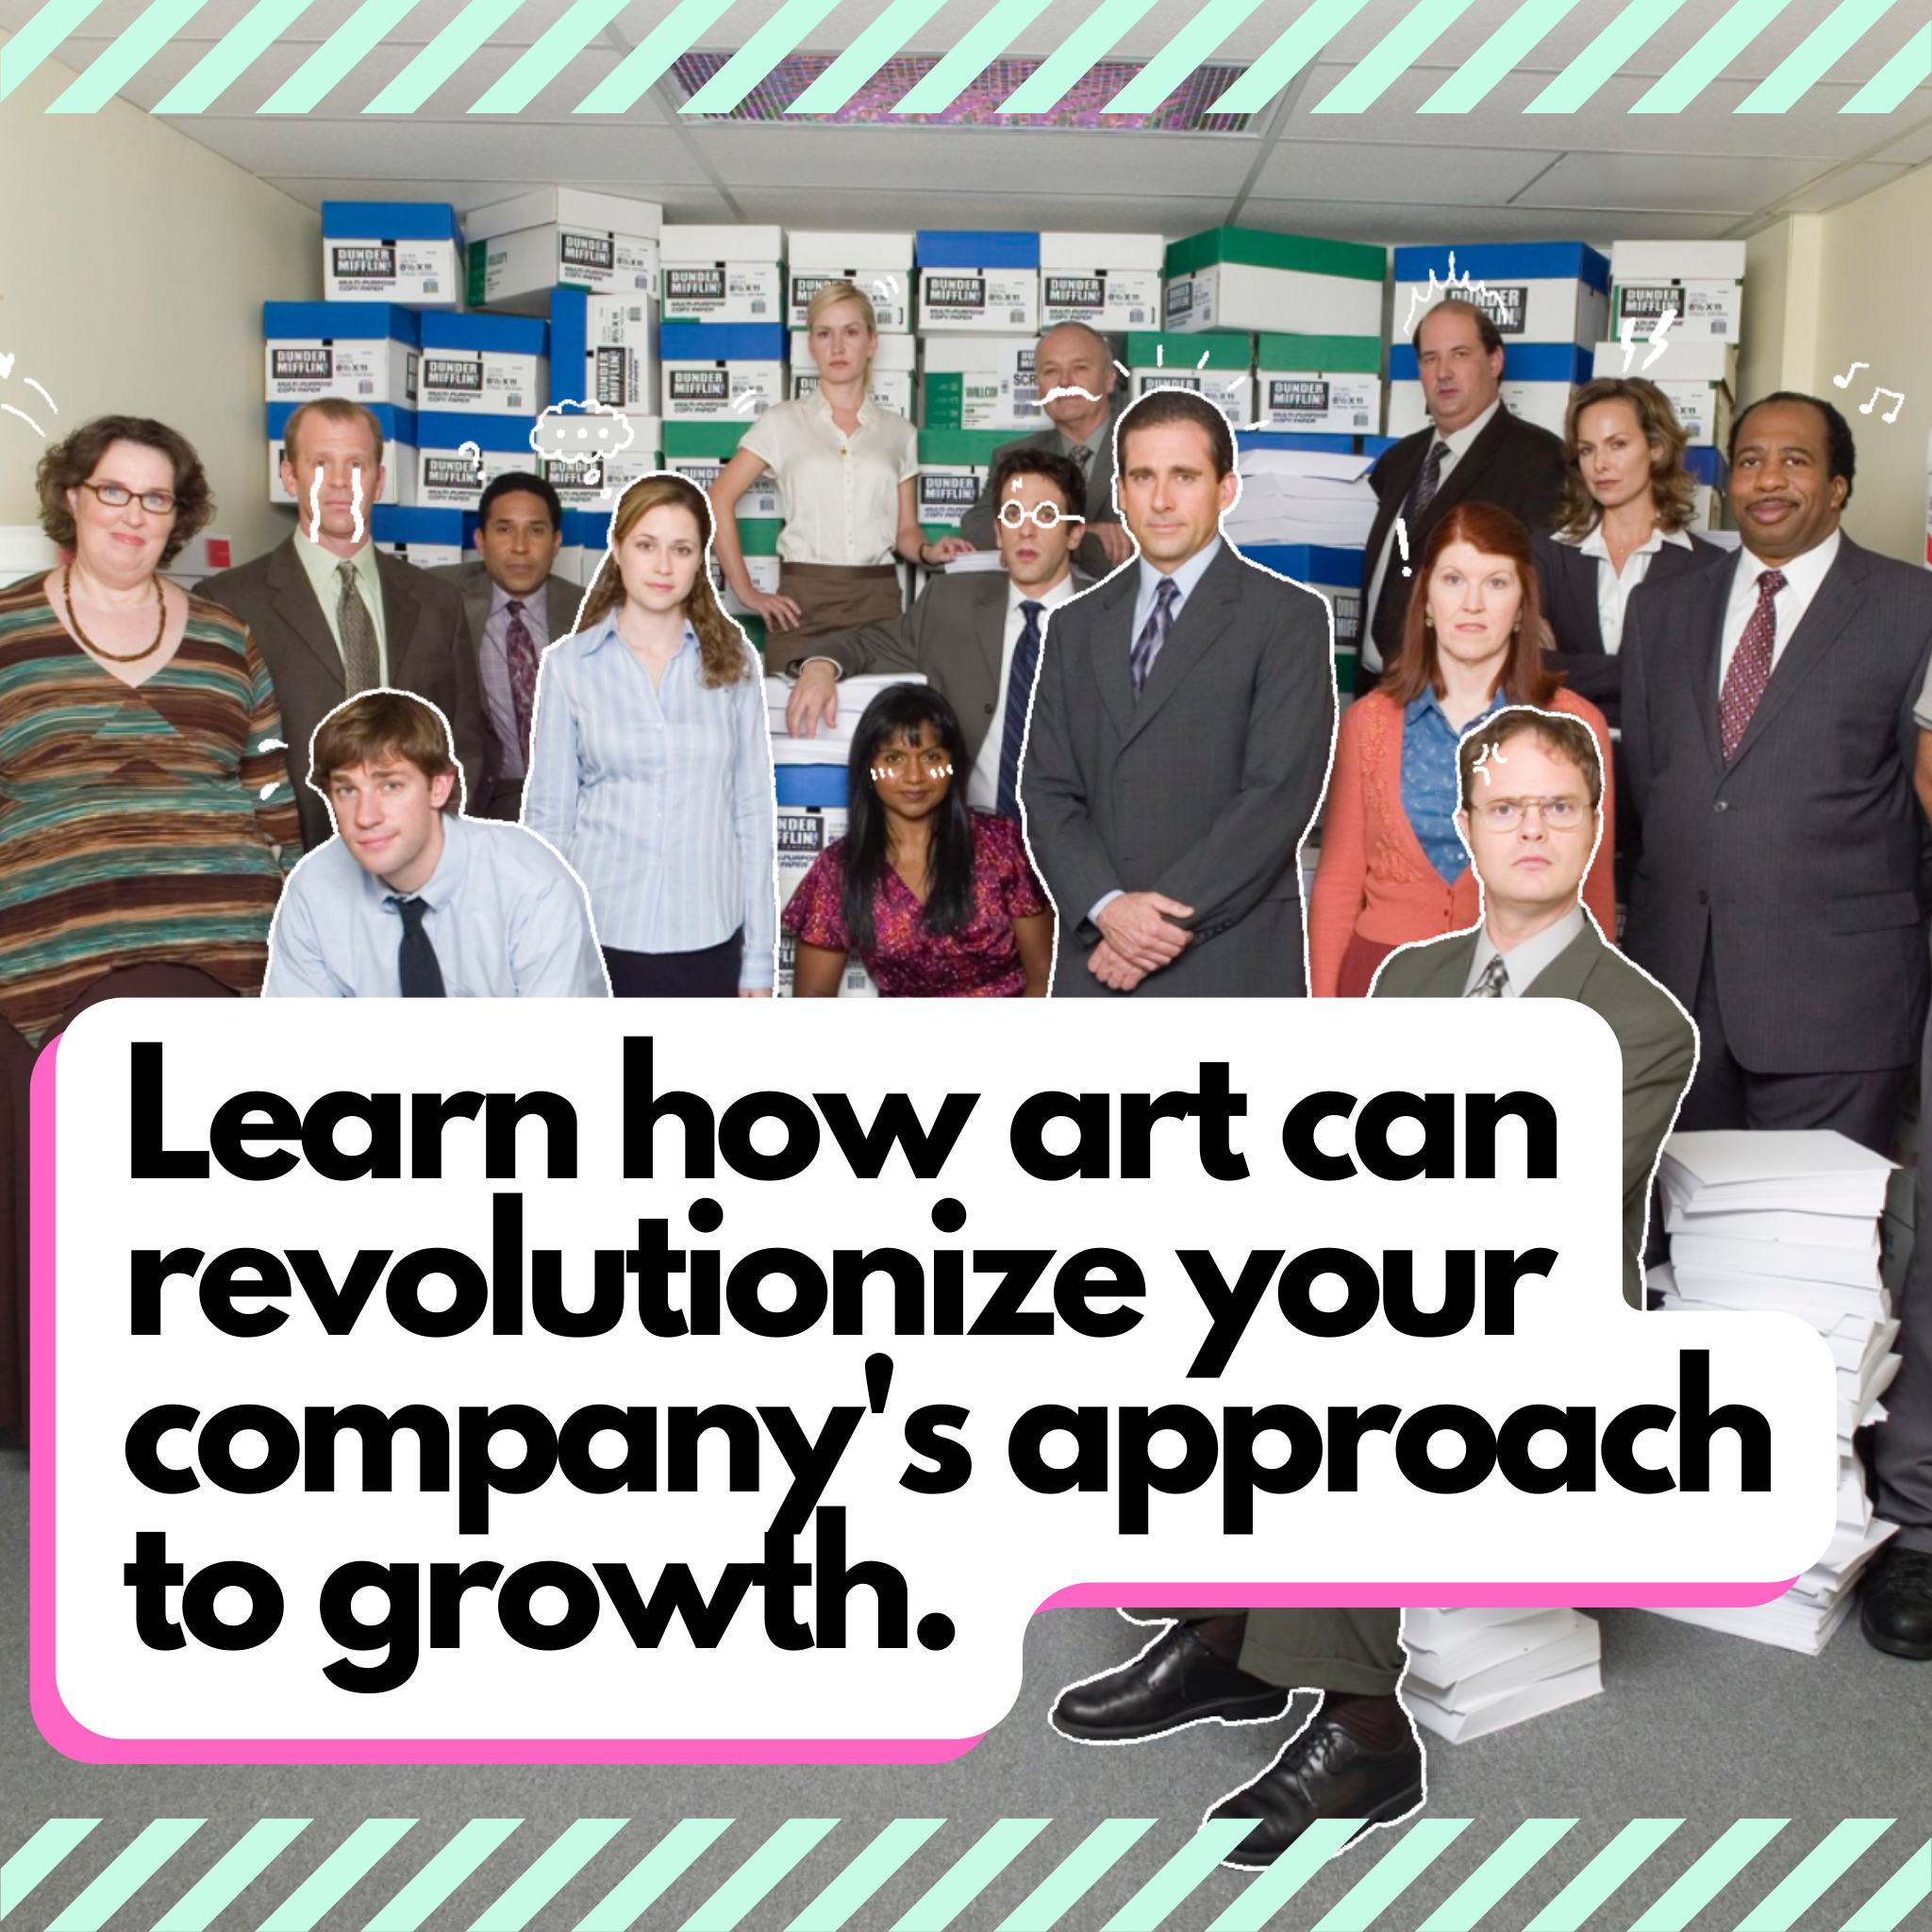 5 Reasons Art Helps Companies Grow (and Why You Should Attend Our Events)